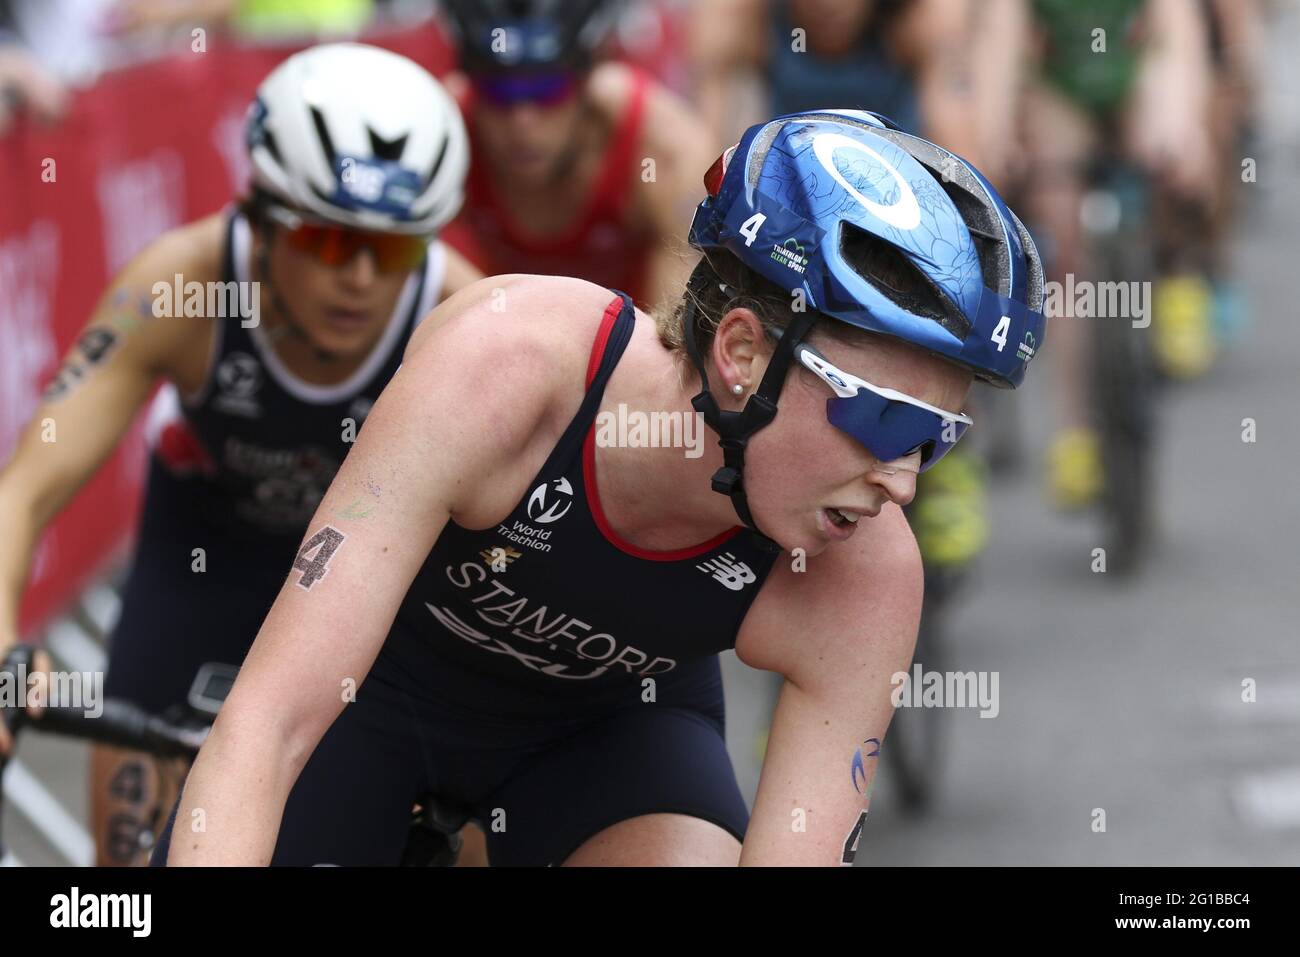 Leeds, UK. 06th June, 2021. Non Stanford in action during the AJ Bell 2021 World Triathlon Series in Roundhay Park, Leeds. Credit: SPP Sport Press Photo. /Alamy Live News Stock Photo